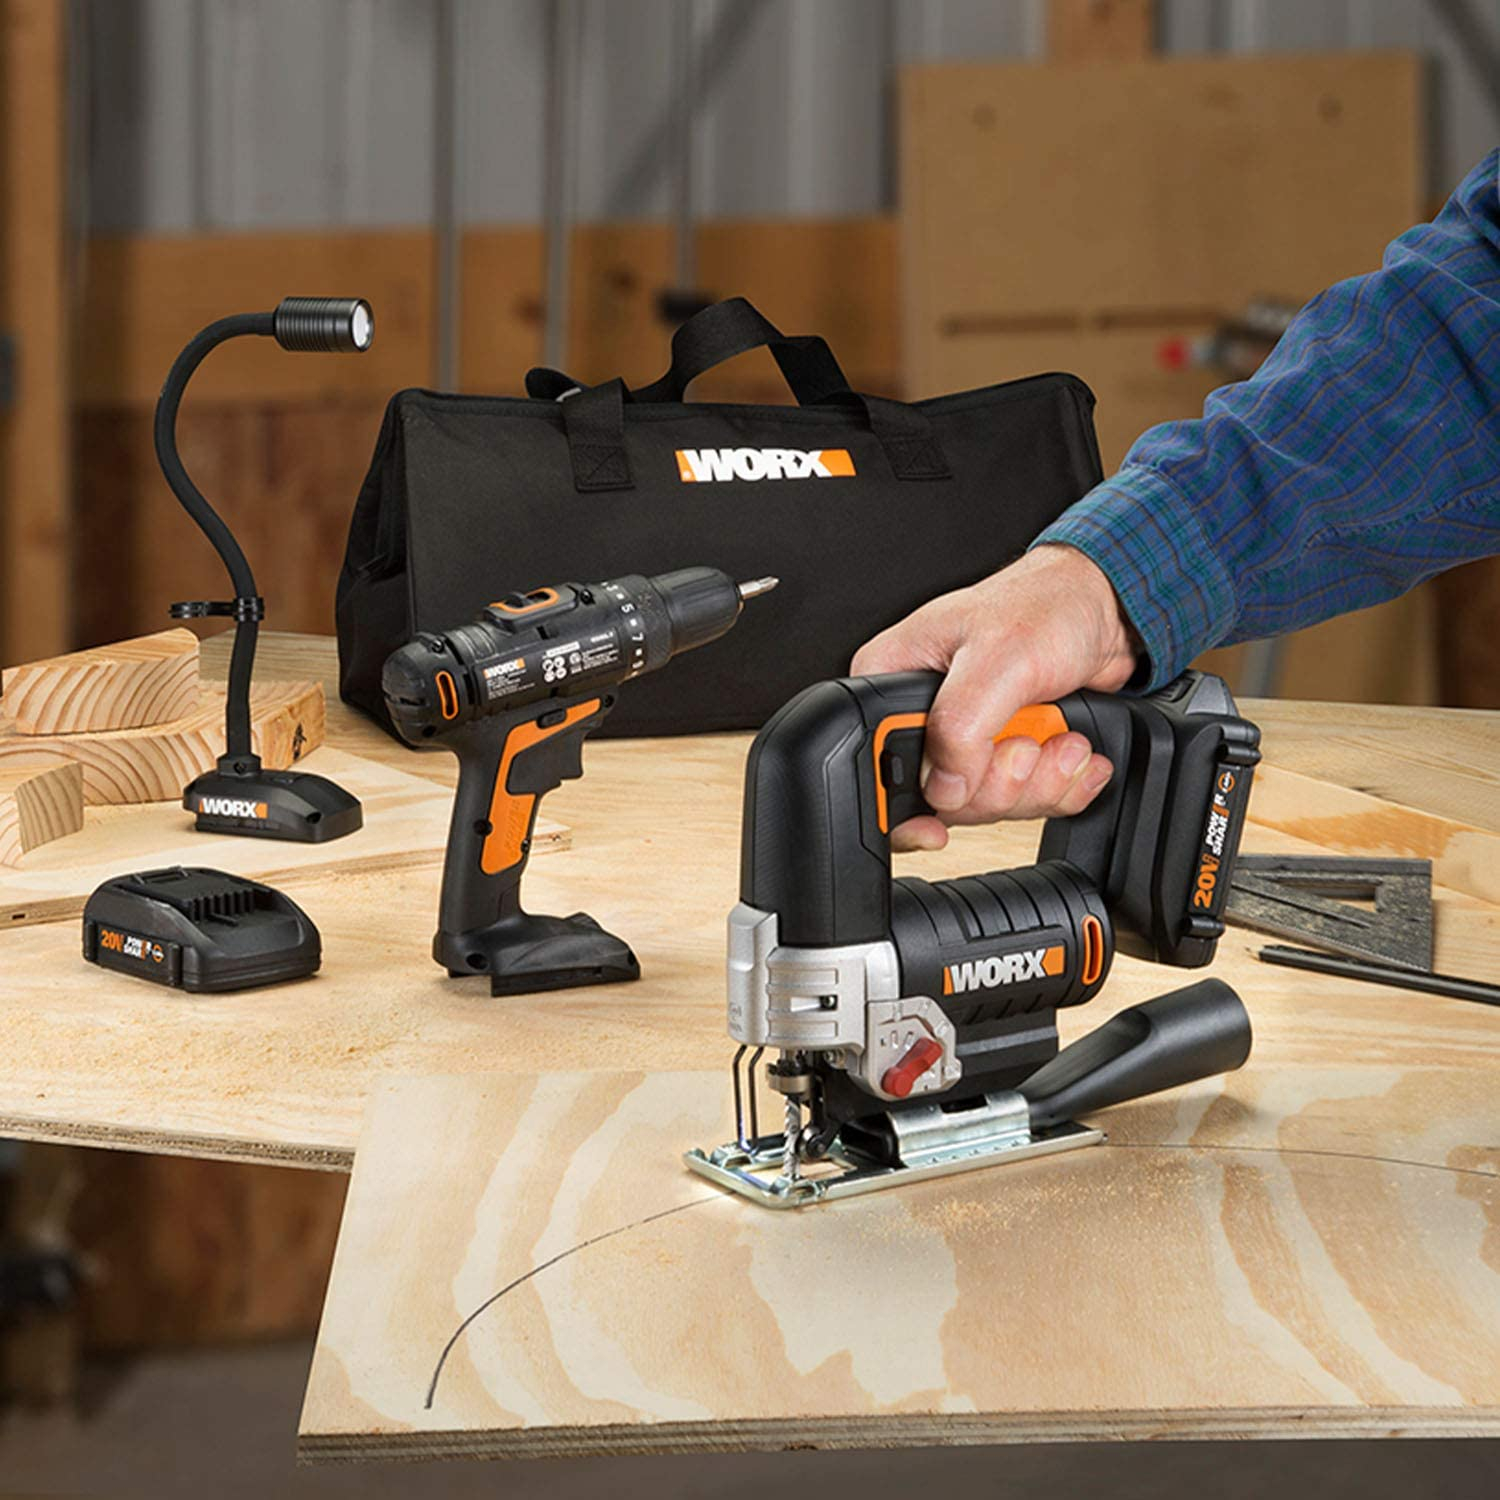 35% off on WORX Impact Drill  Jigsaw Set OneDayOnly